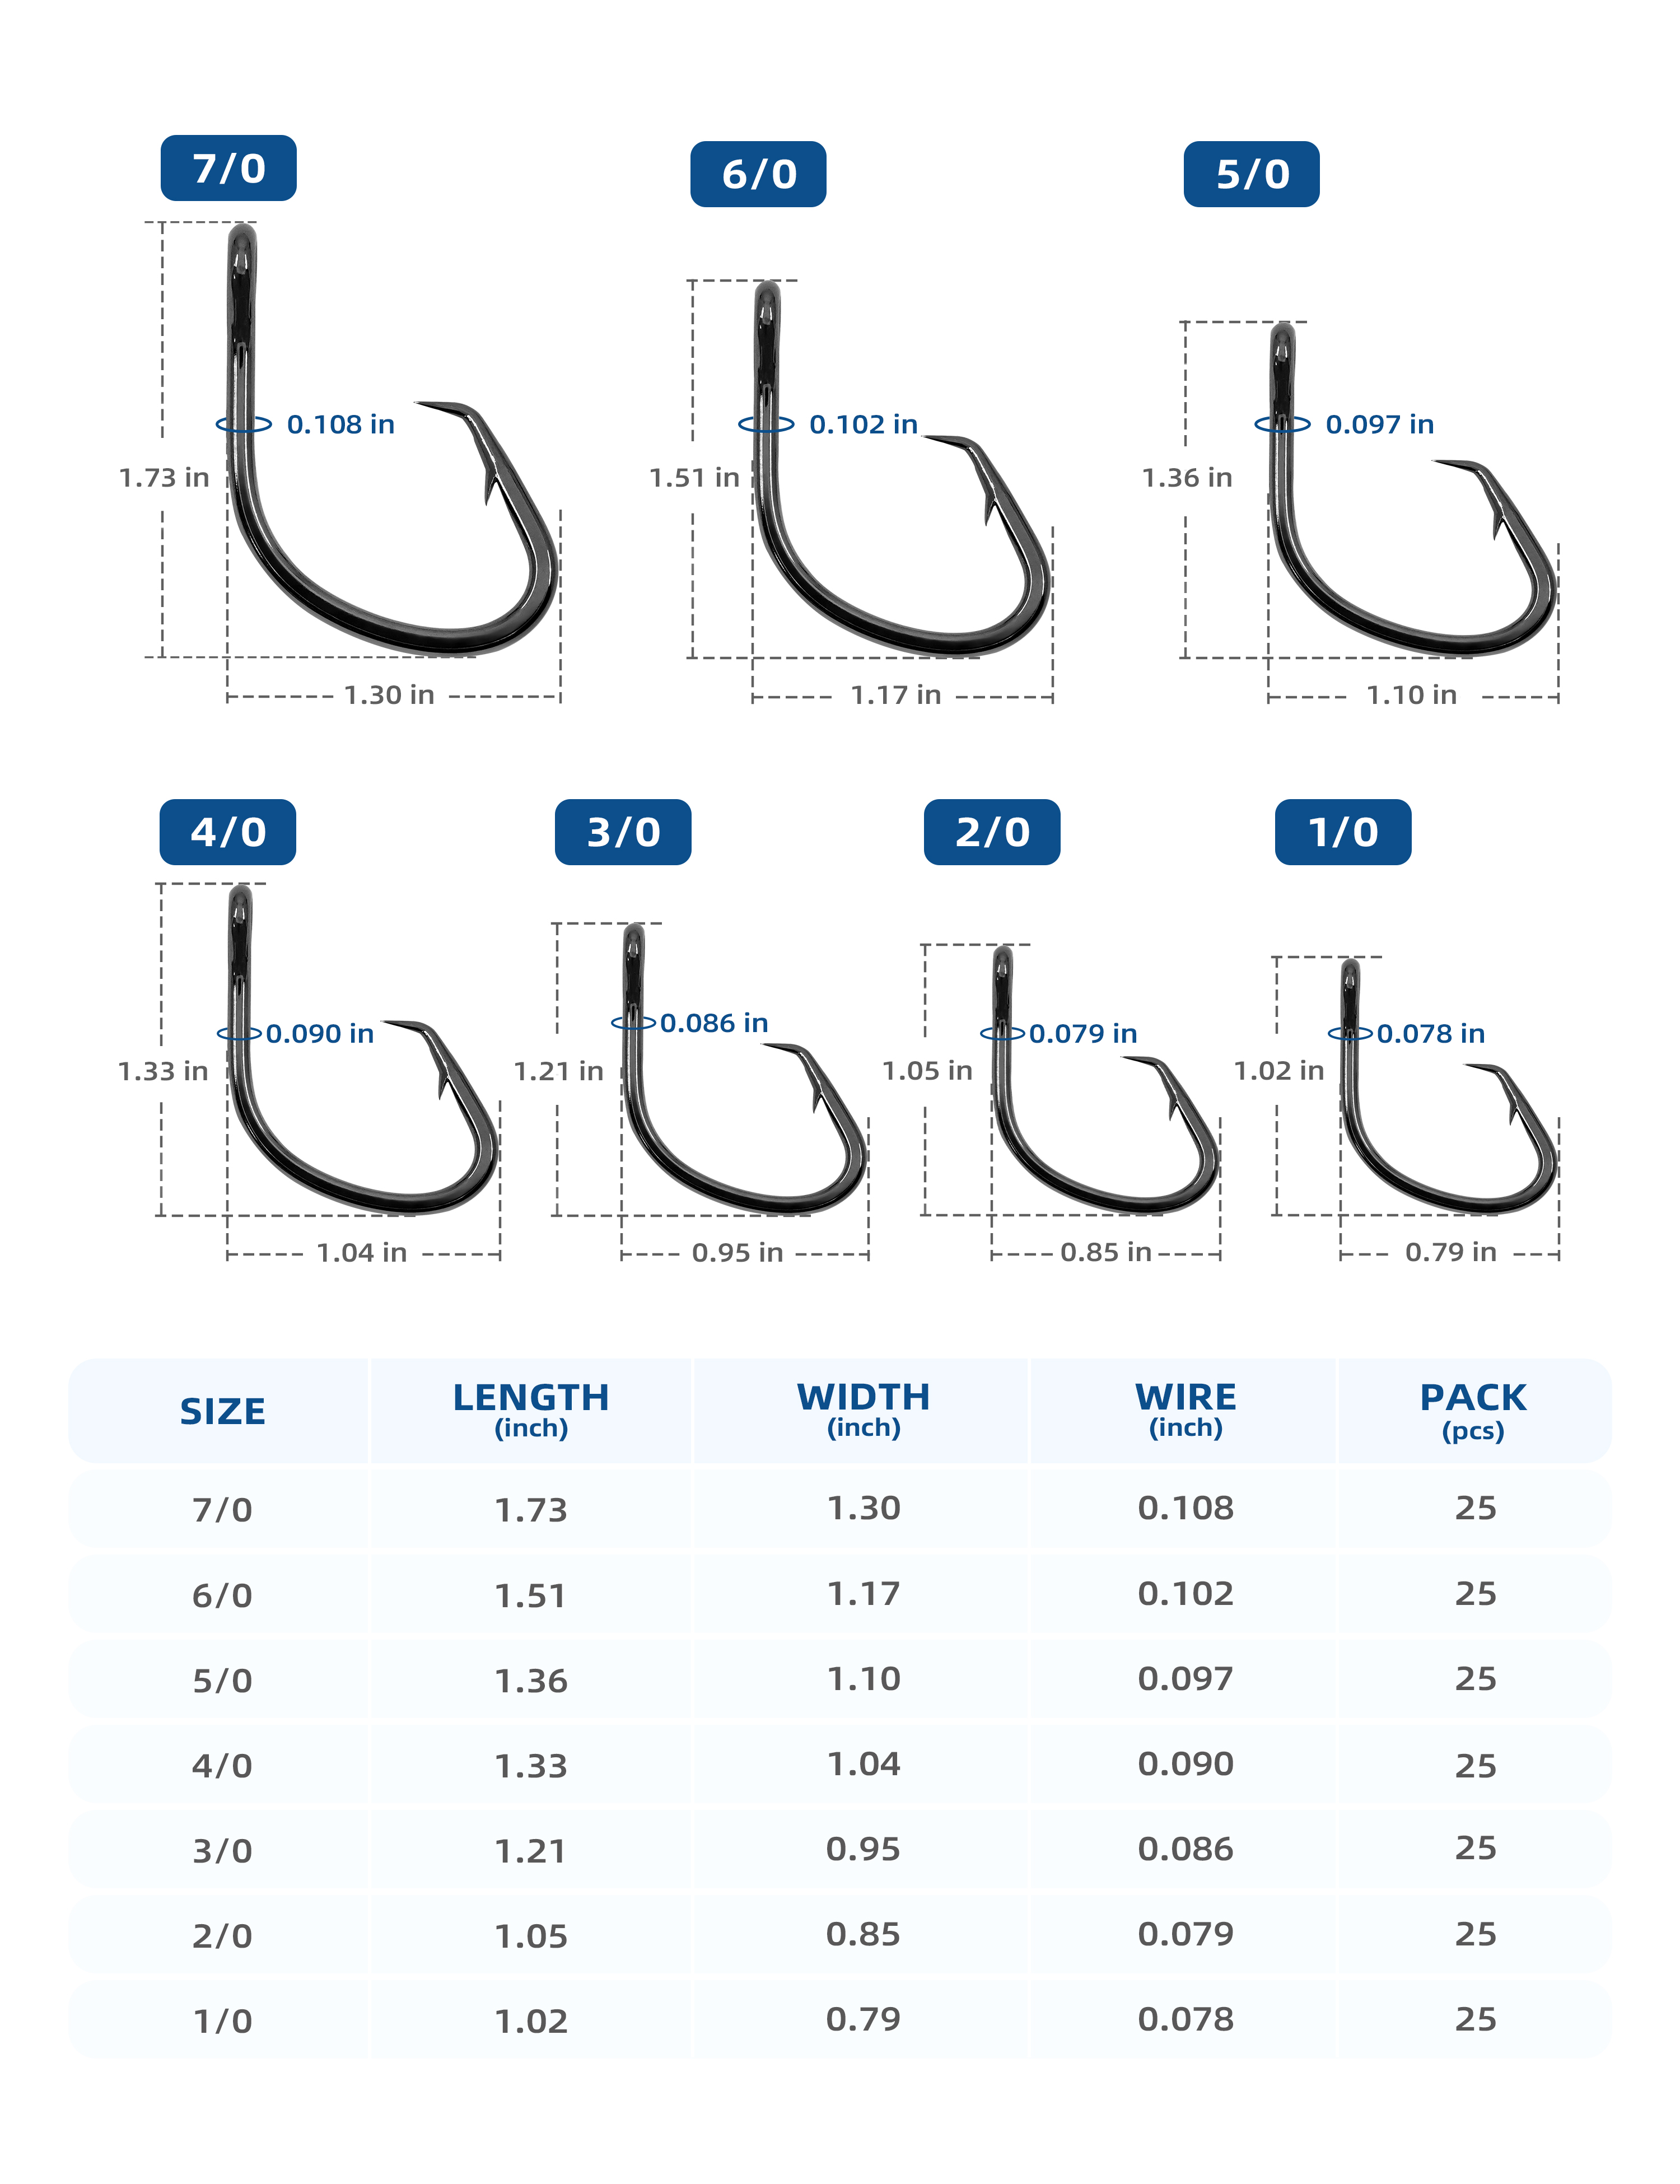 Bluewing Big Game Circle Hooks 25pcs Heavy Duty Stainless Steel Fishing Hooks for Saltwater & Freshwater, Size 5/0, Size: 04: 5/0, 25pcs